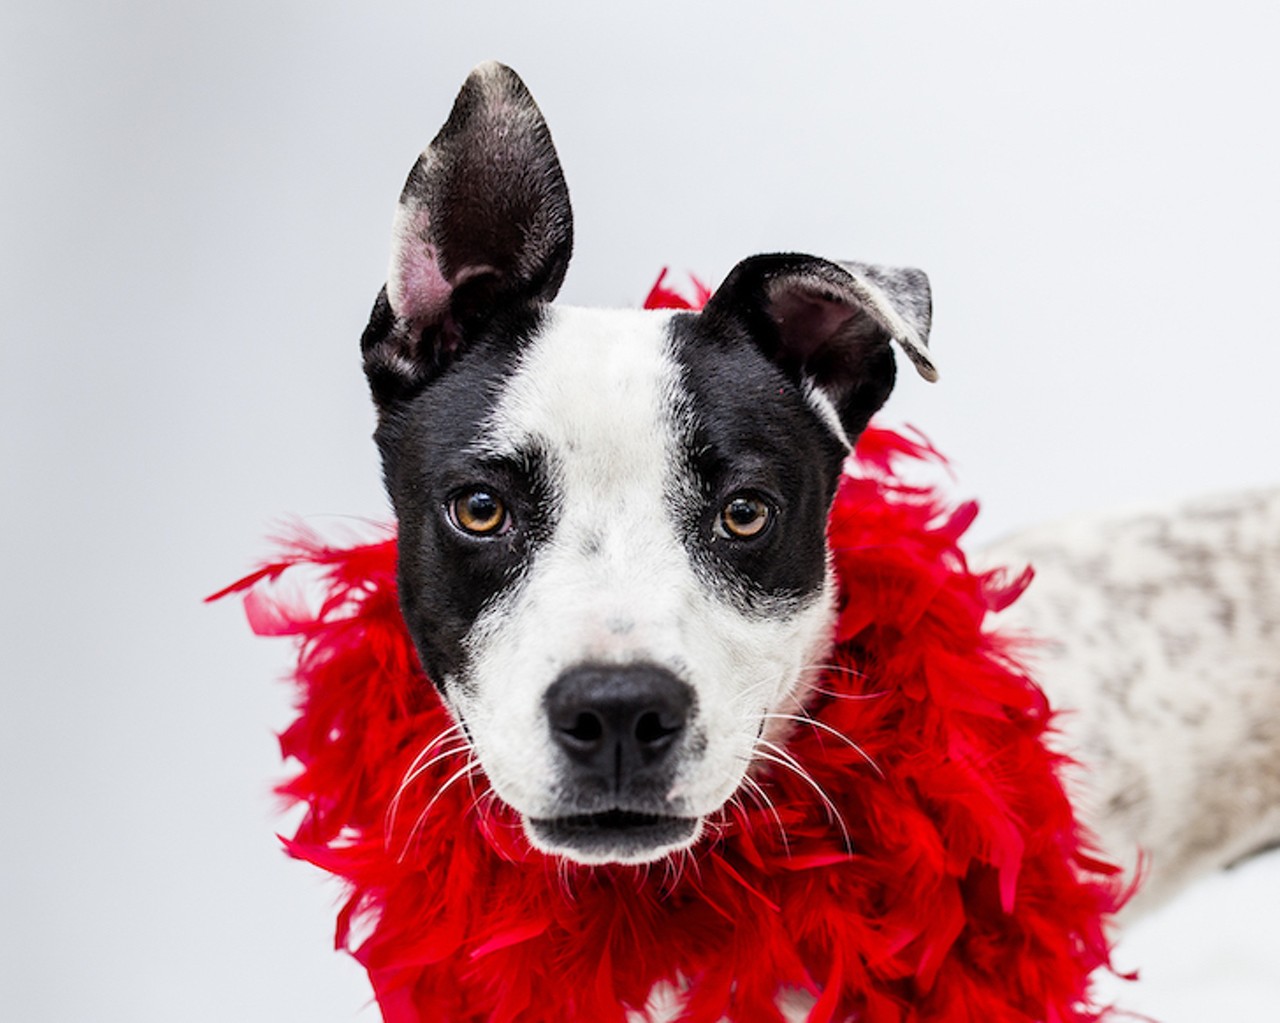 20 adoptable dogs available right now at Orange County Animal Services